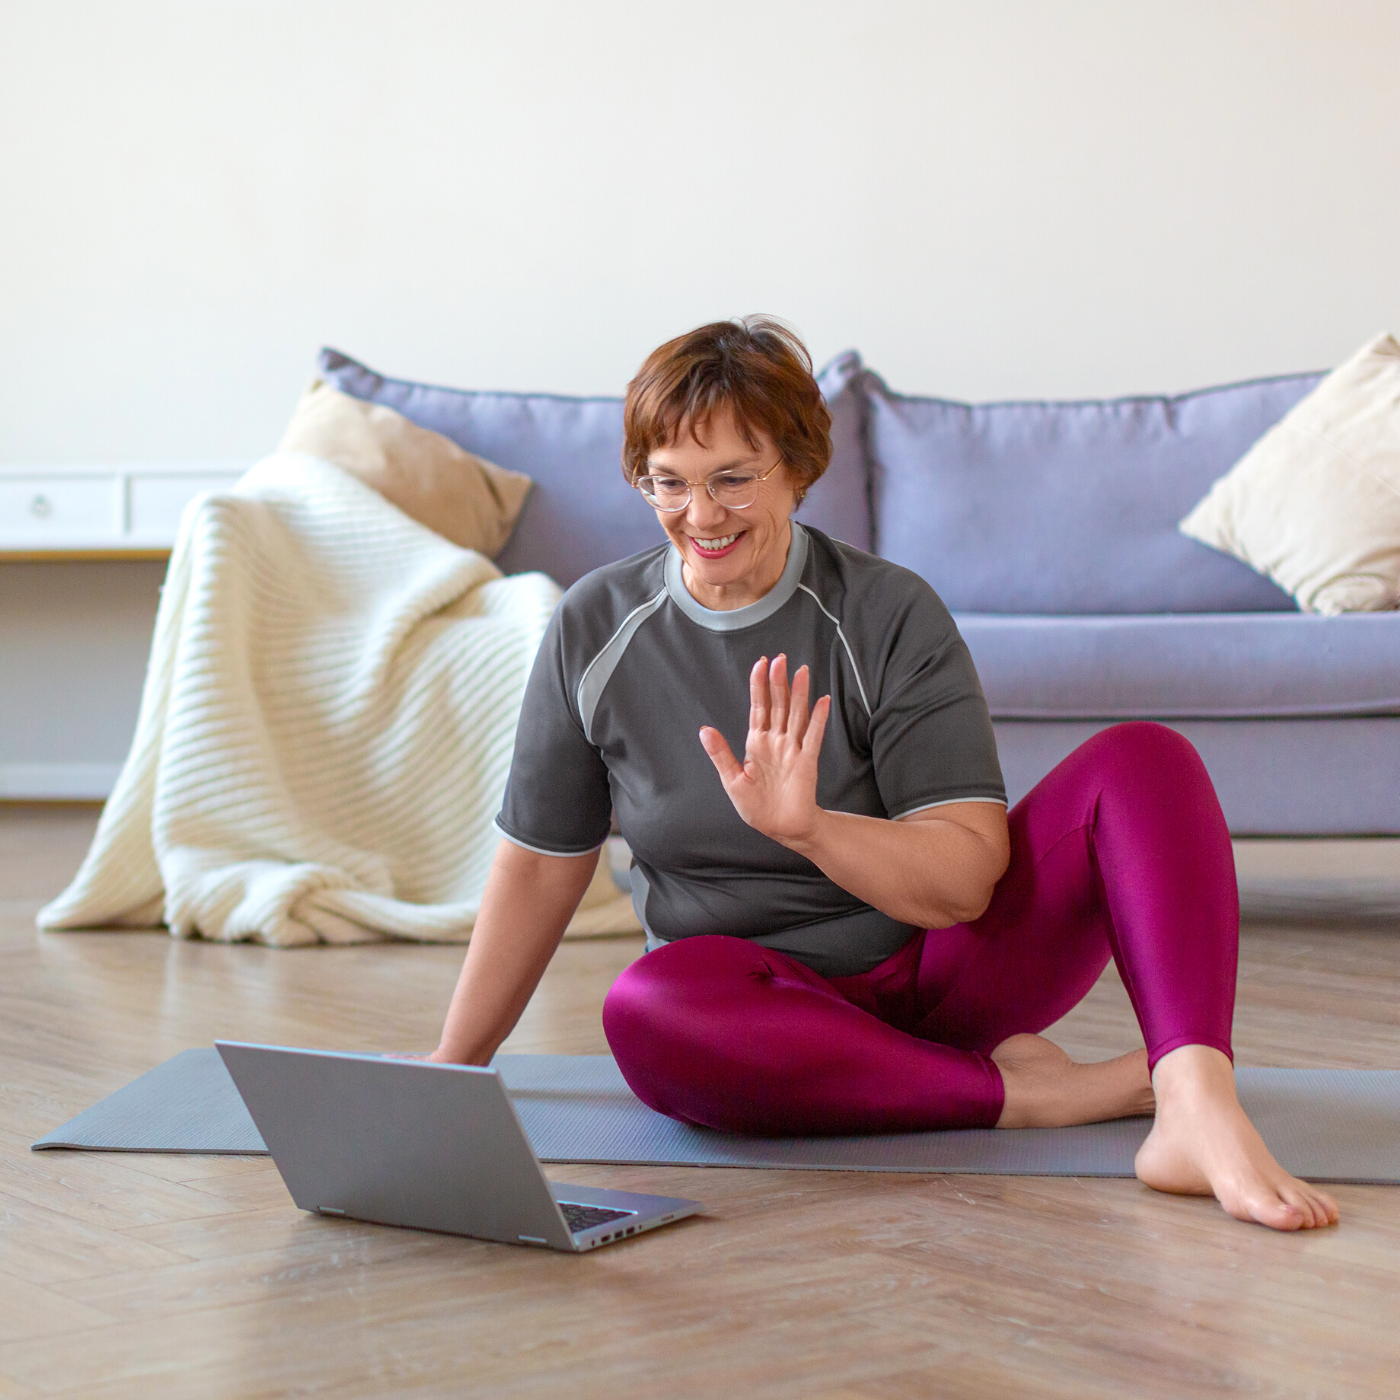 Woman doing pilates at home - Pilates Over 50 - How To Get Started At Home - heike yates